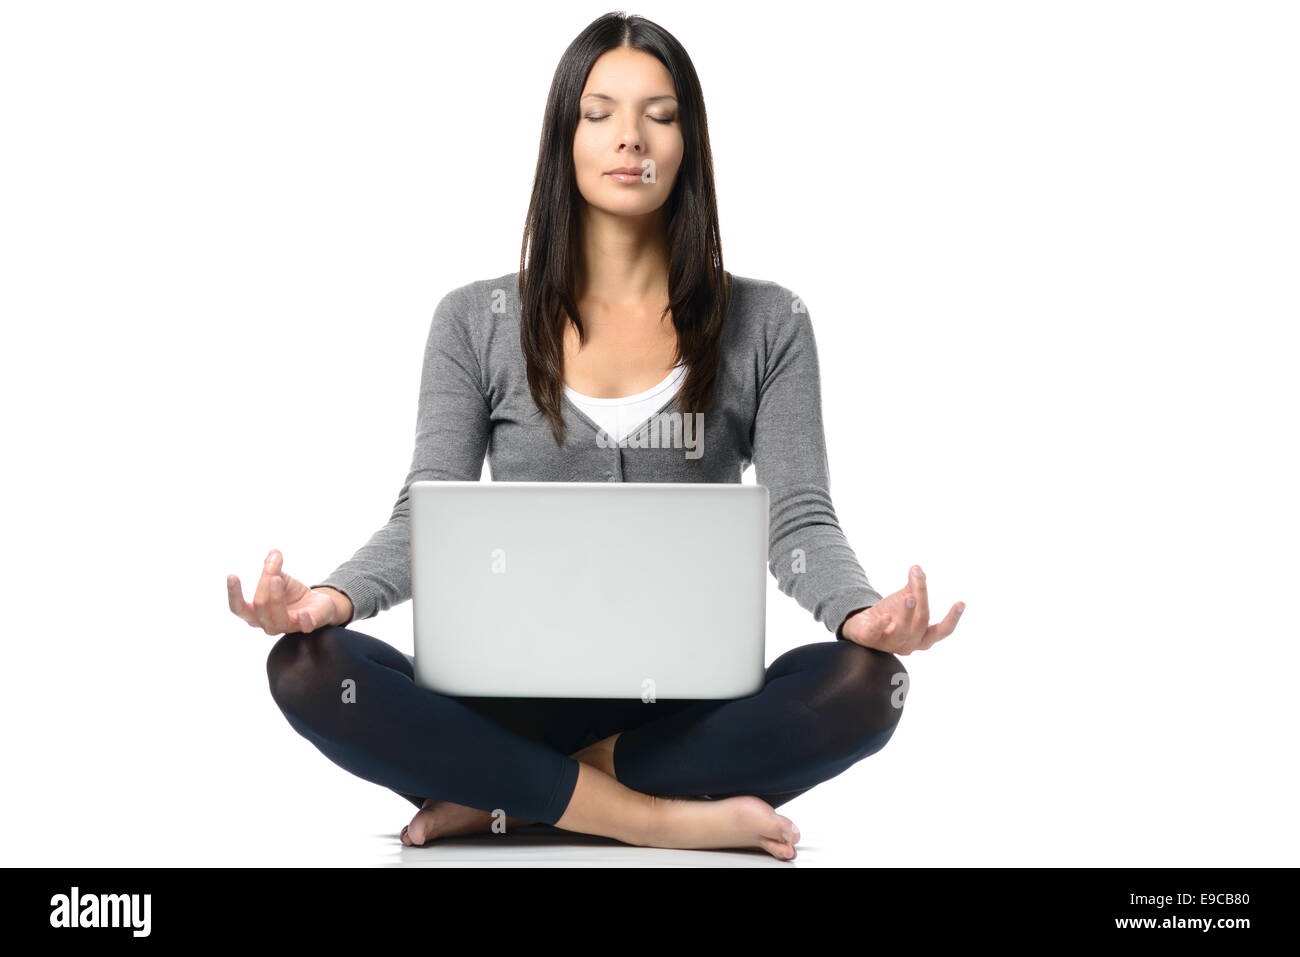 Pretty Long Hair Woman in Meditating Pose with Crossed Legs While Facing a Laptop in Front. Isolated on White Stock Photo